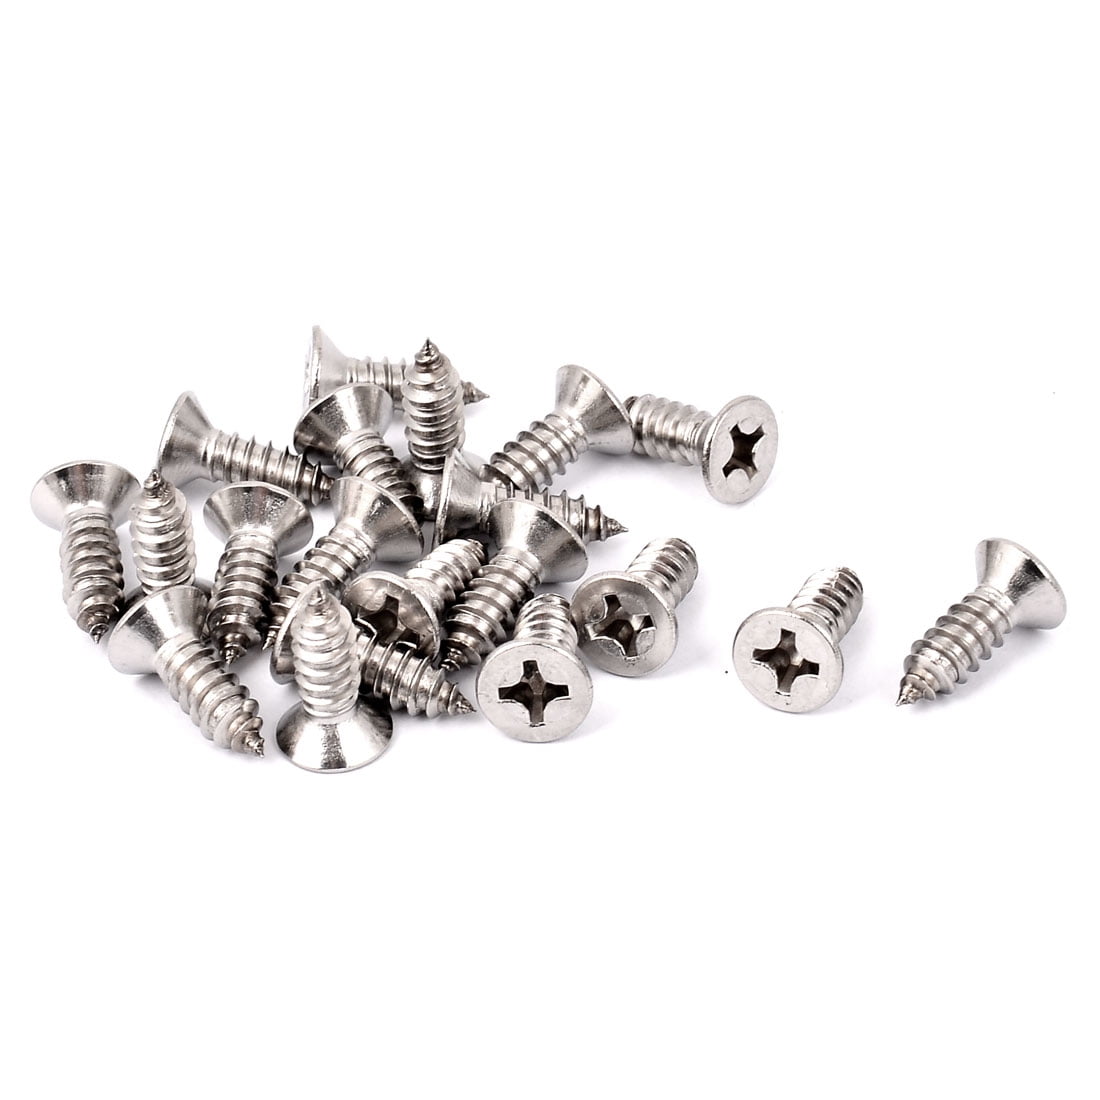 6mm SMALL SILVER METAL SELF TAPPING PHILLIPS SCREWS CROSS HEAD DOLL HOUSE DIY 